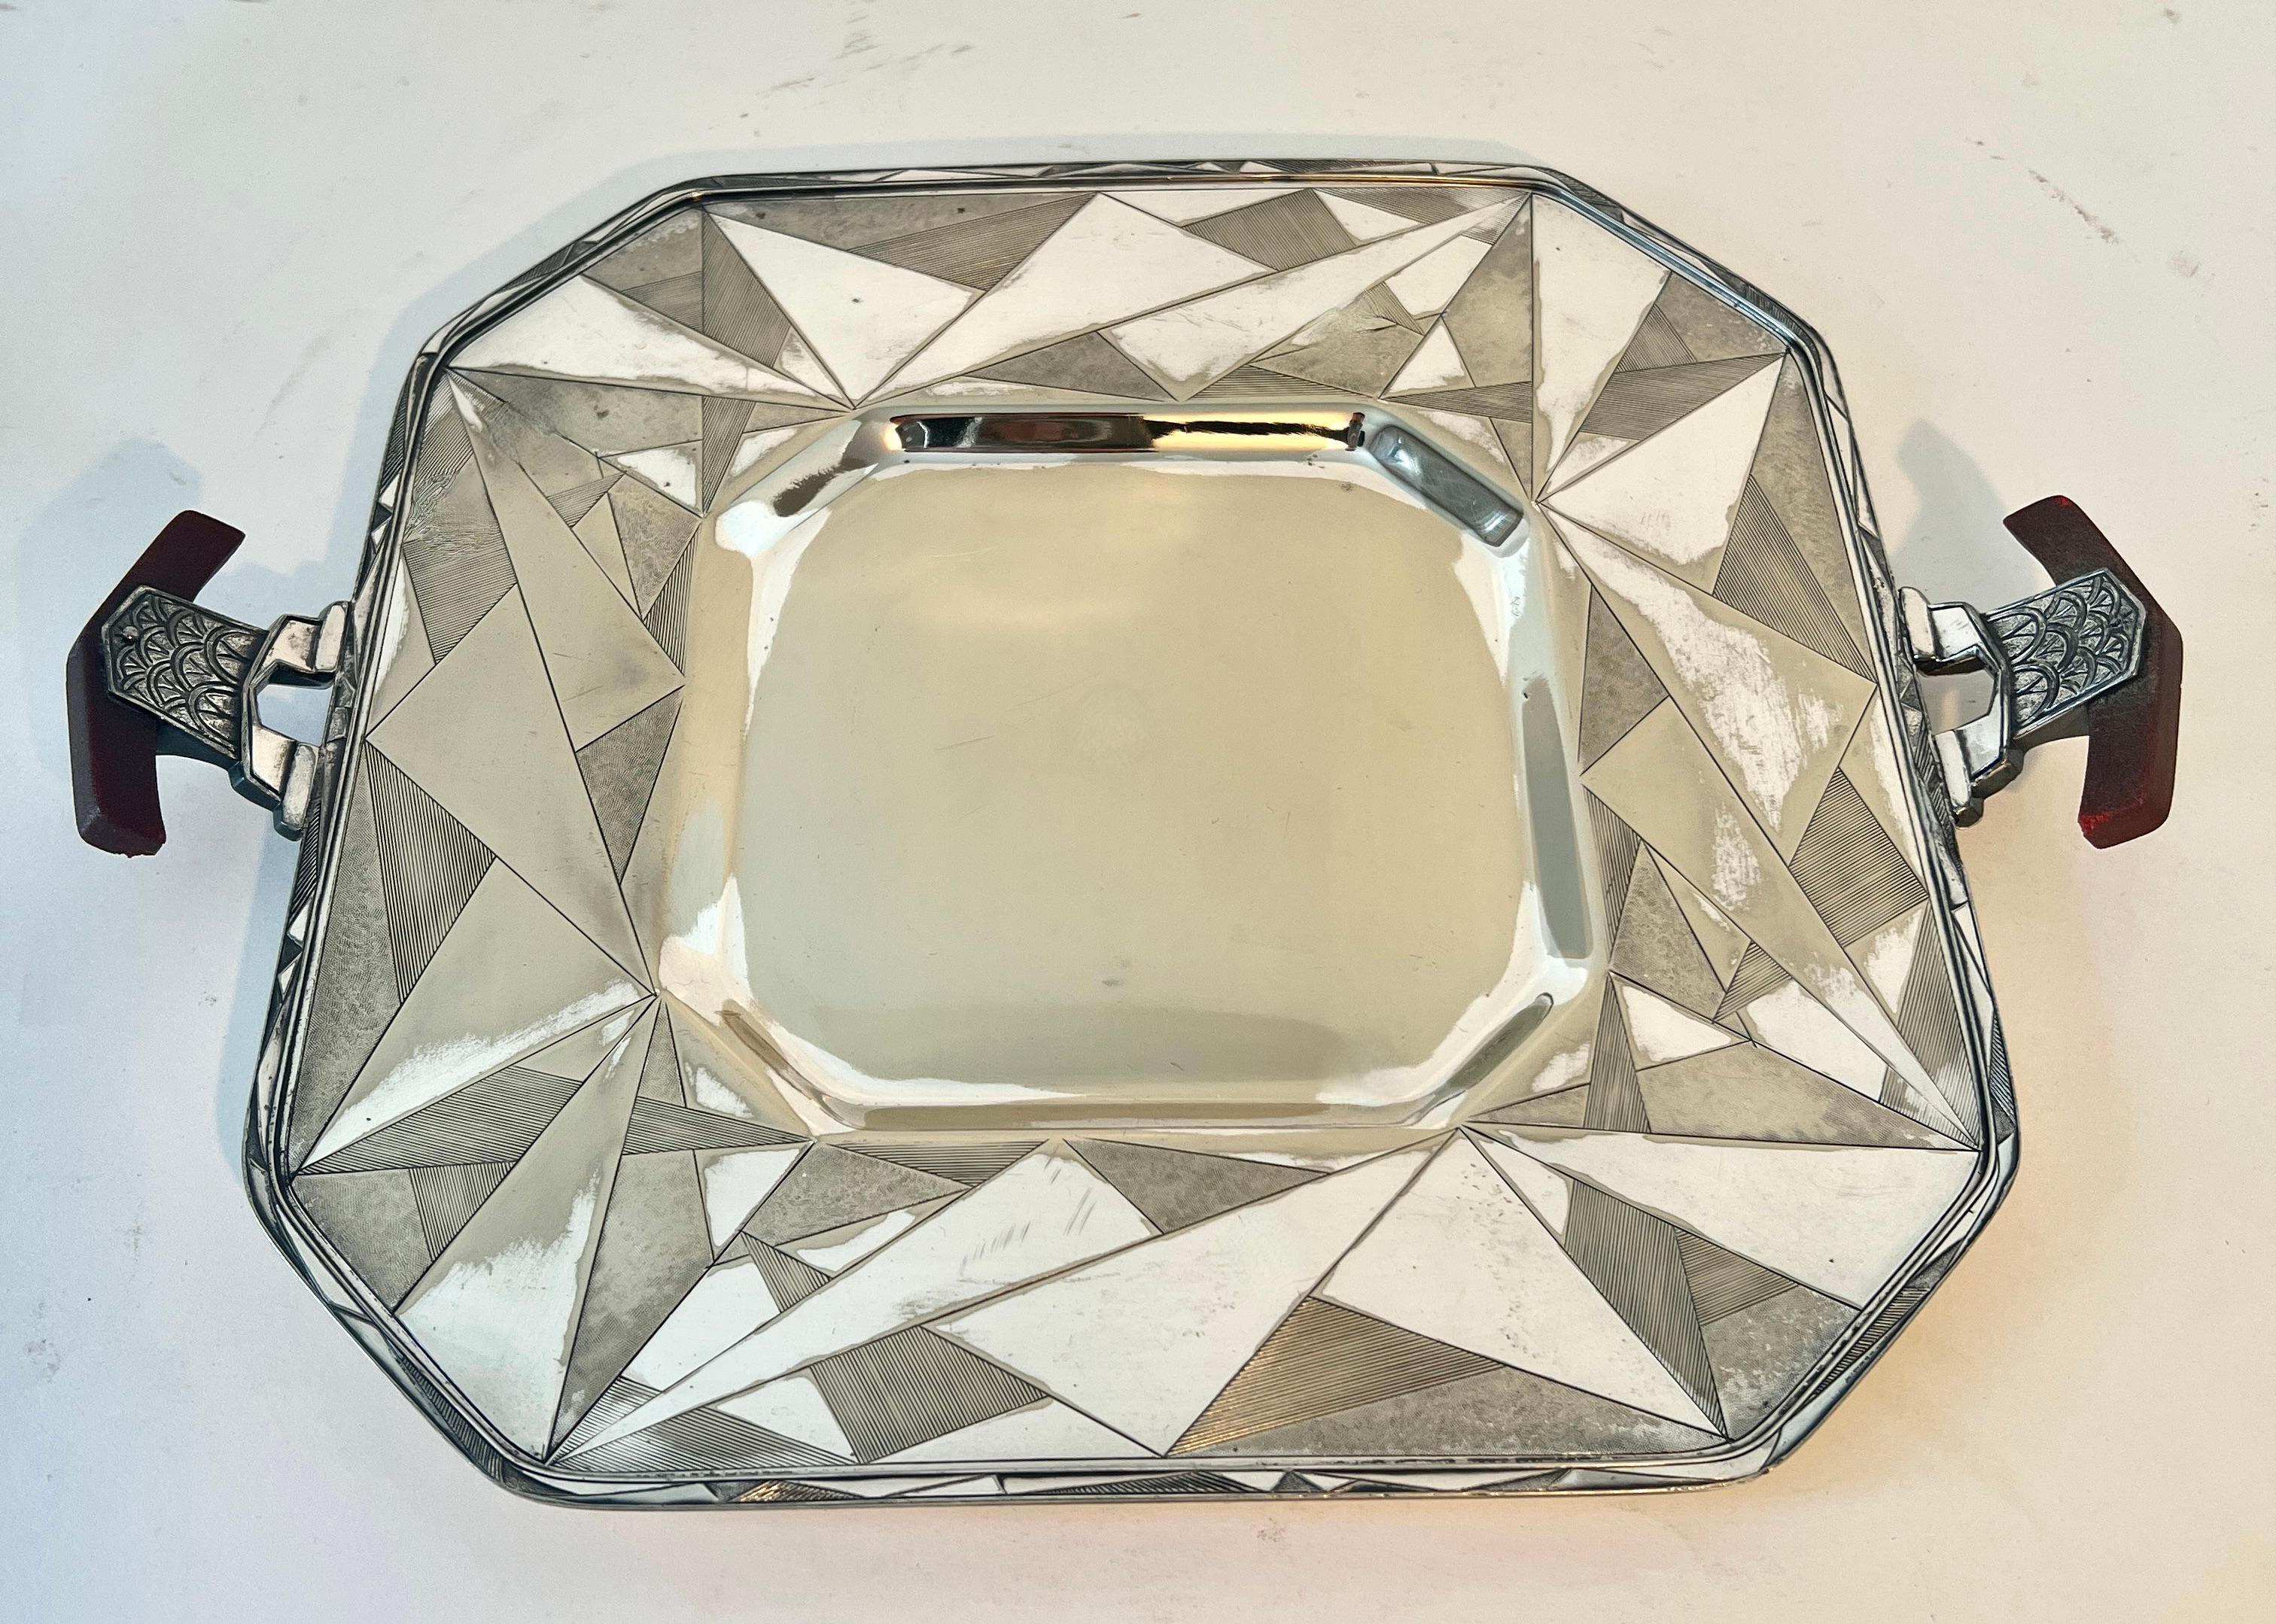 A wonderful Geometric Art Deco Silver Plate Tray, circa 1920.

the tray has a great look that works as well as a decorative piece or functional.  A compliment to the entry to hold keys, to the desk or work station to hold mail or notes, to the